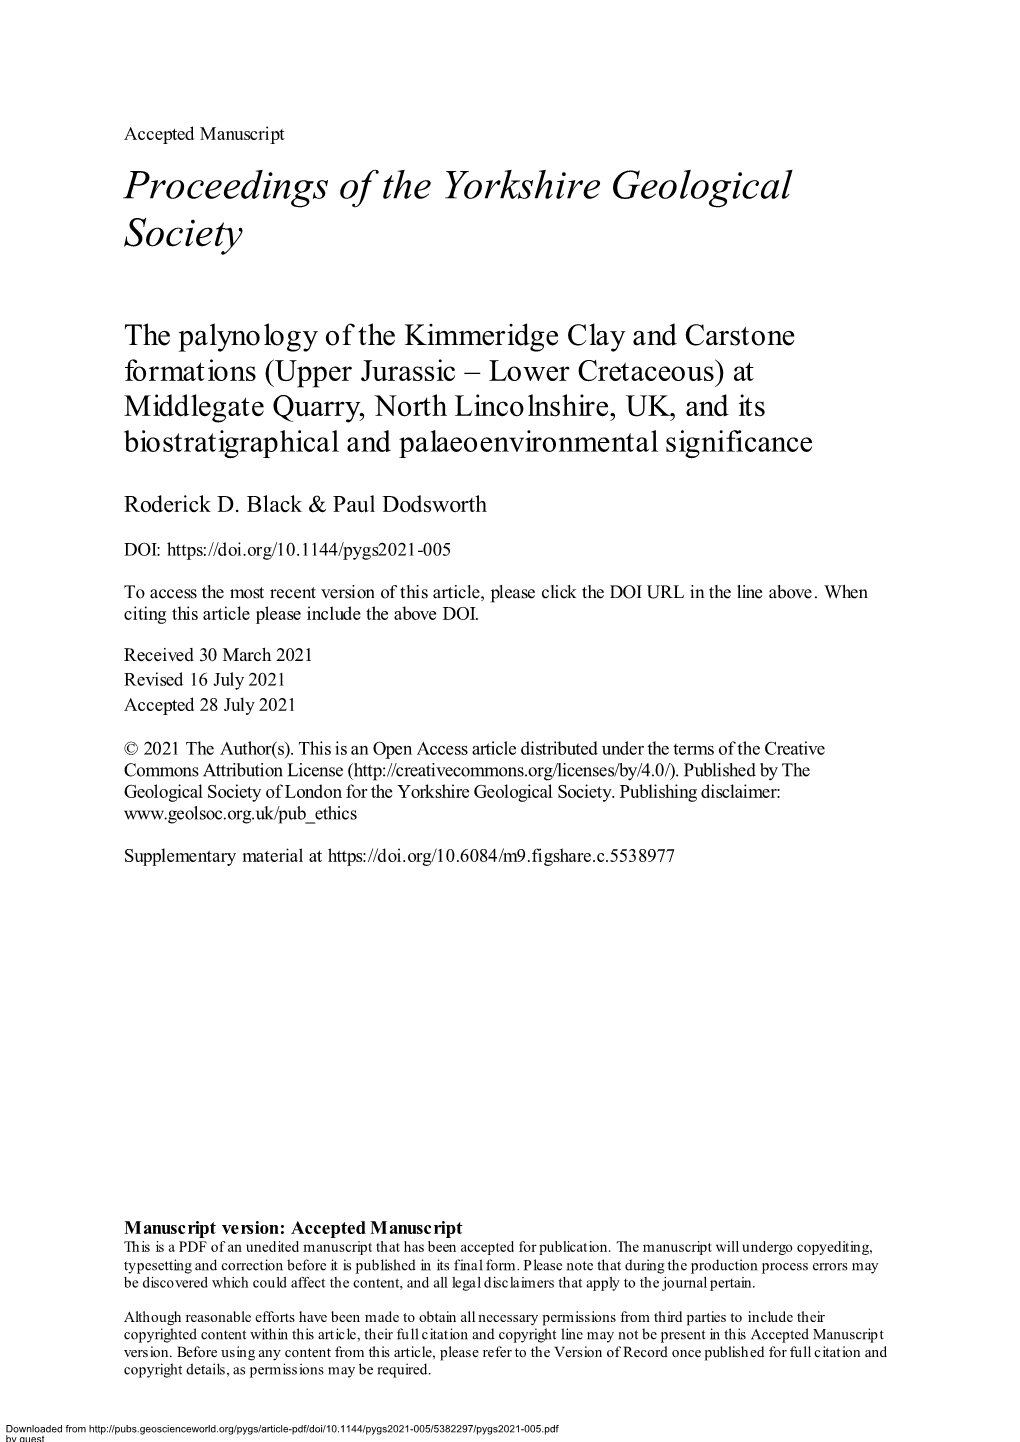 The Palynology of the Kimmeridge Clay and Carstone Formations